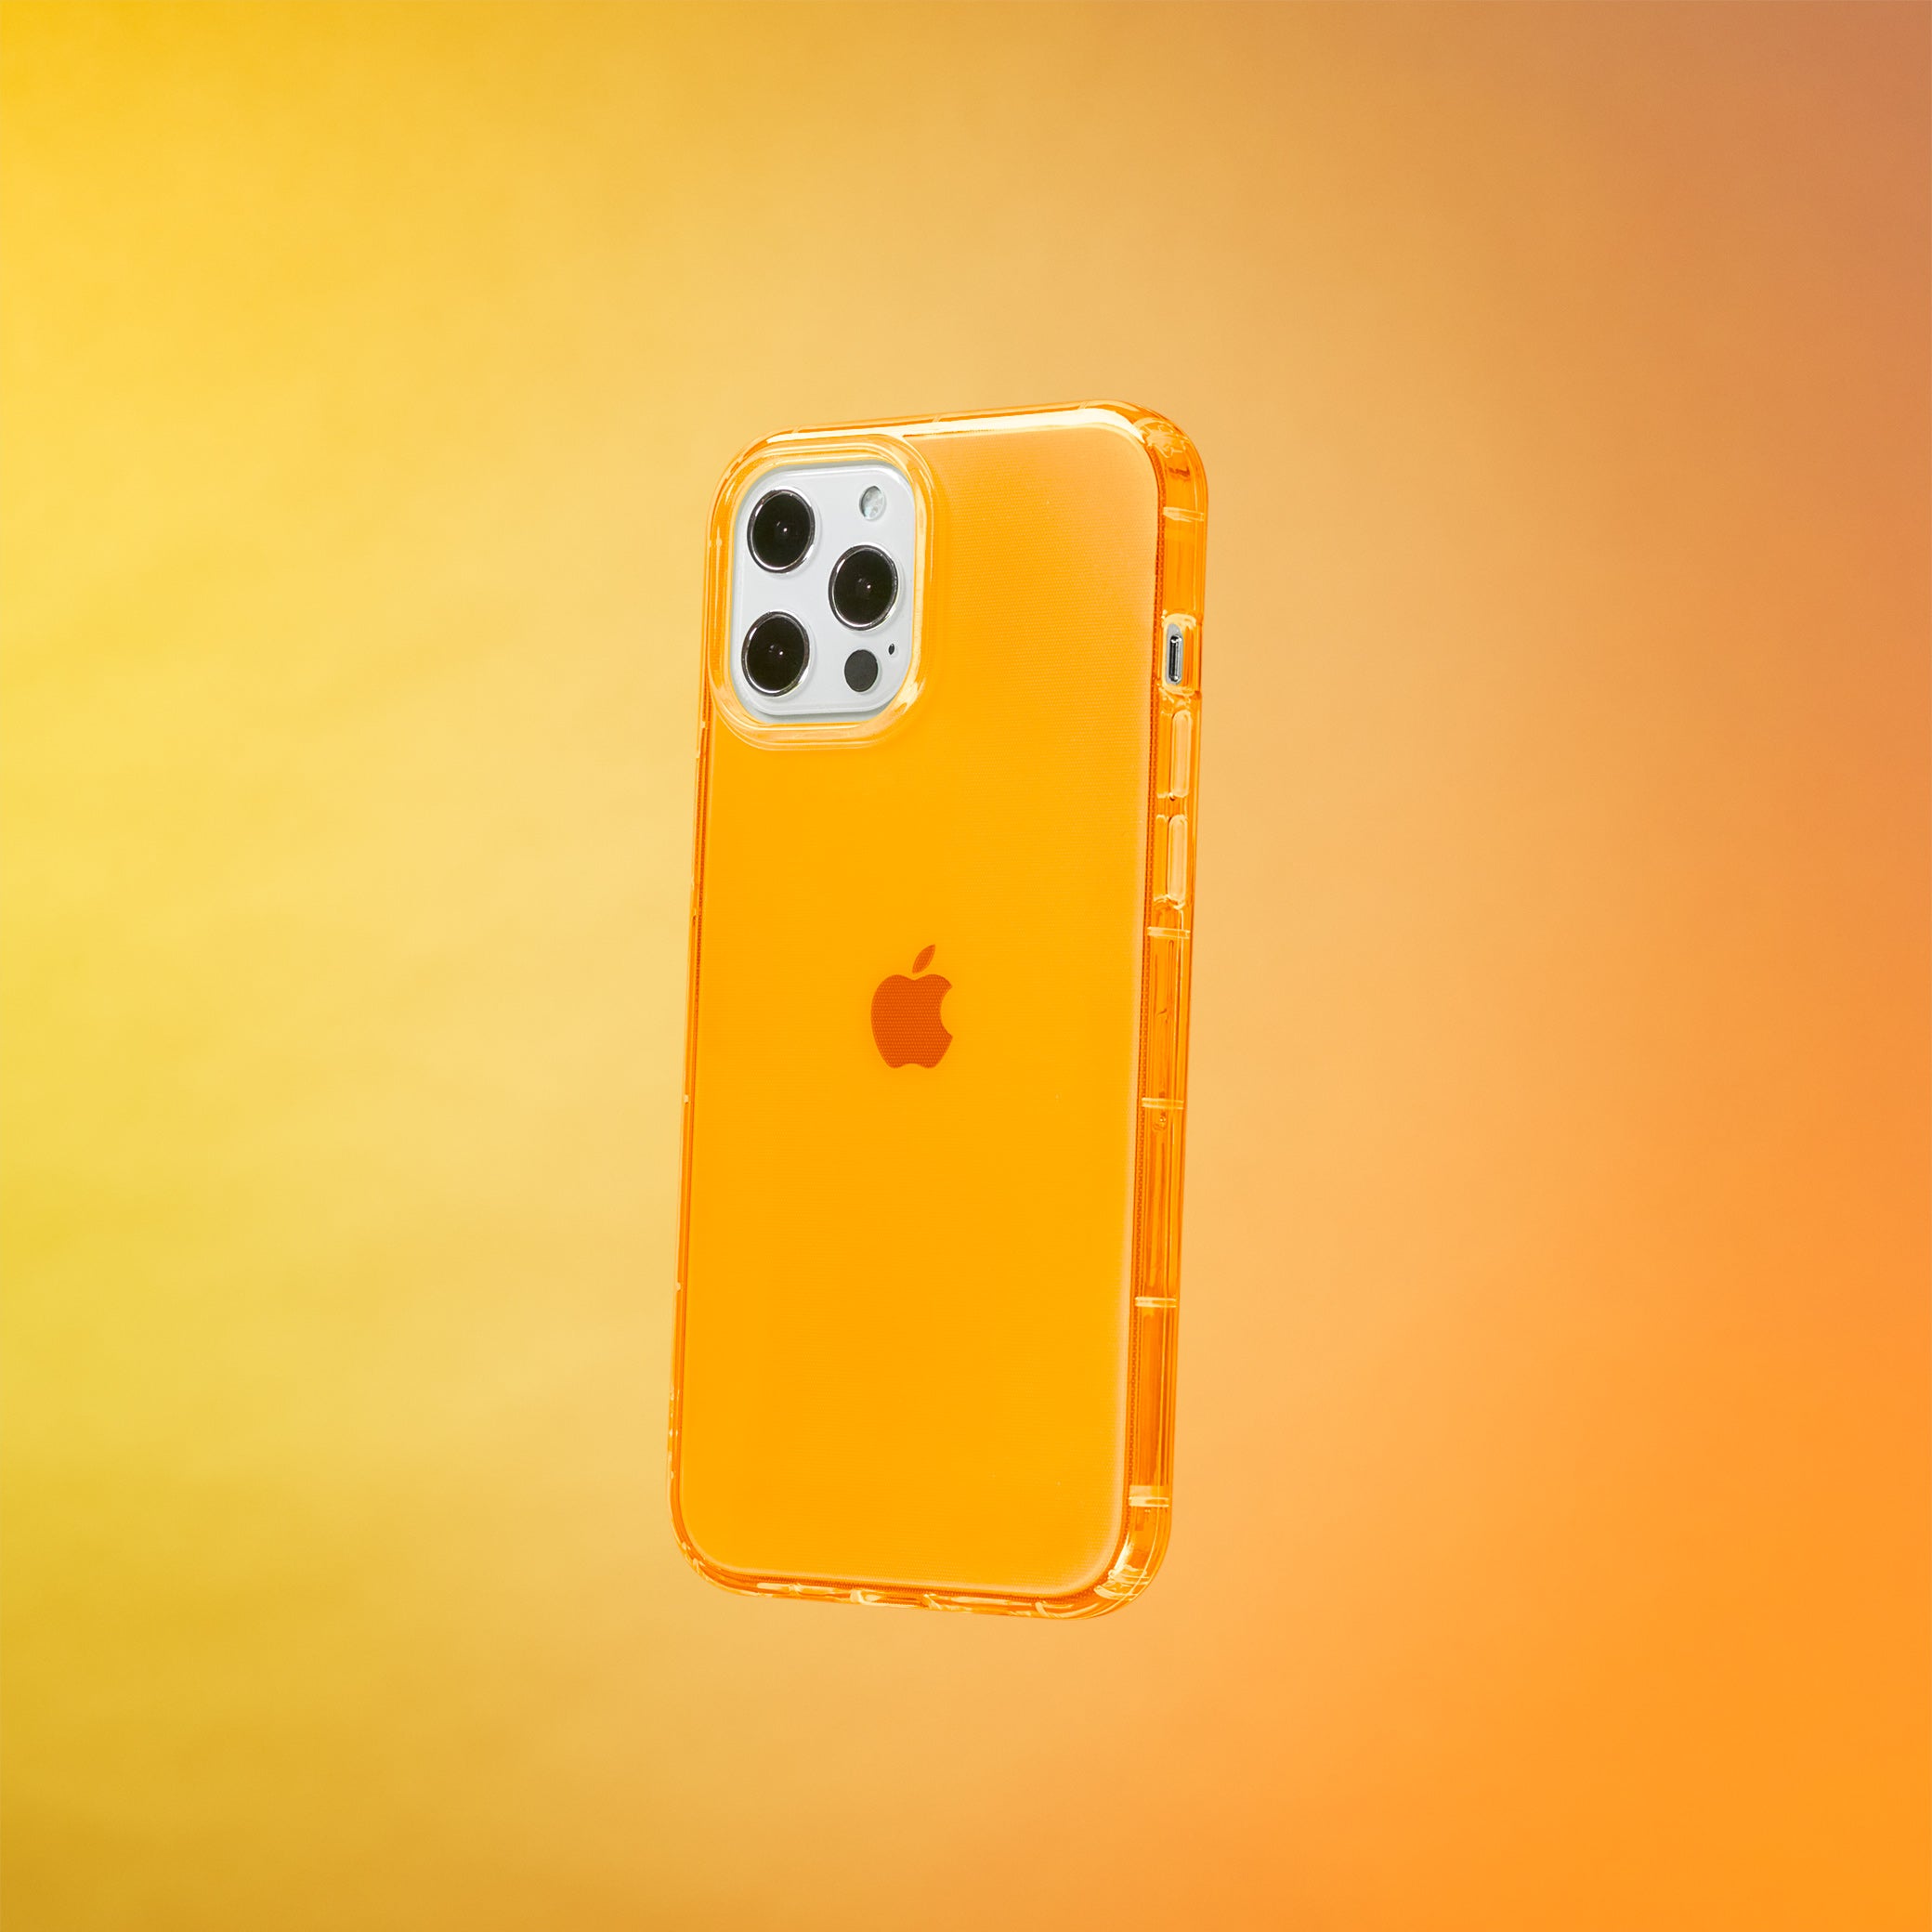 Highlighter Case for iPhone 12 Pro Max - Intense Bright Orange